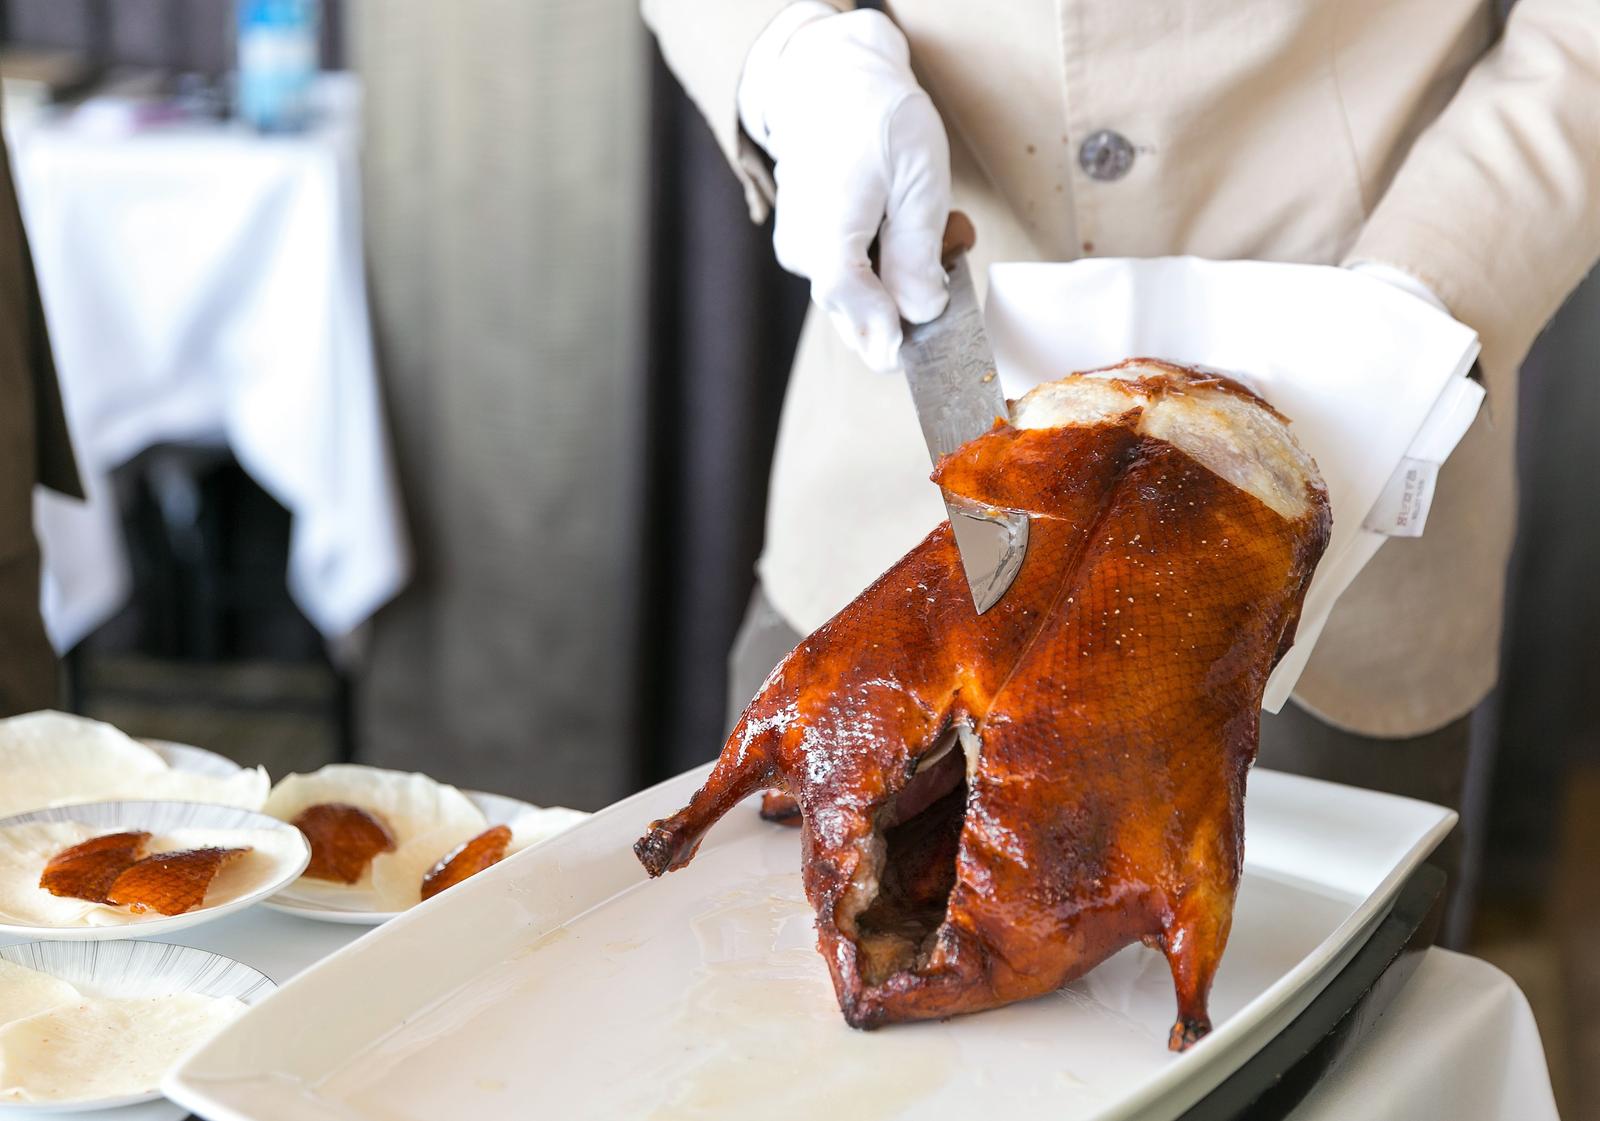 NYC Trip Planning Quiz 🗽: Can We Guess Your Age? Peking duck from Peking Duck House